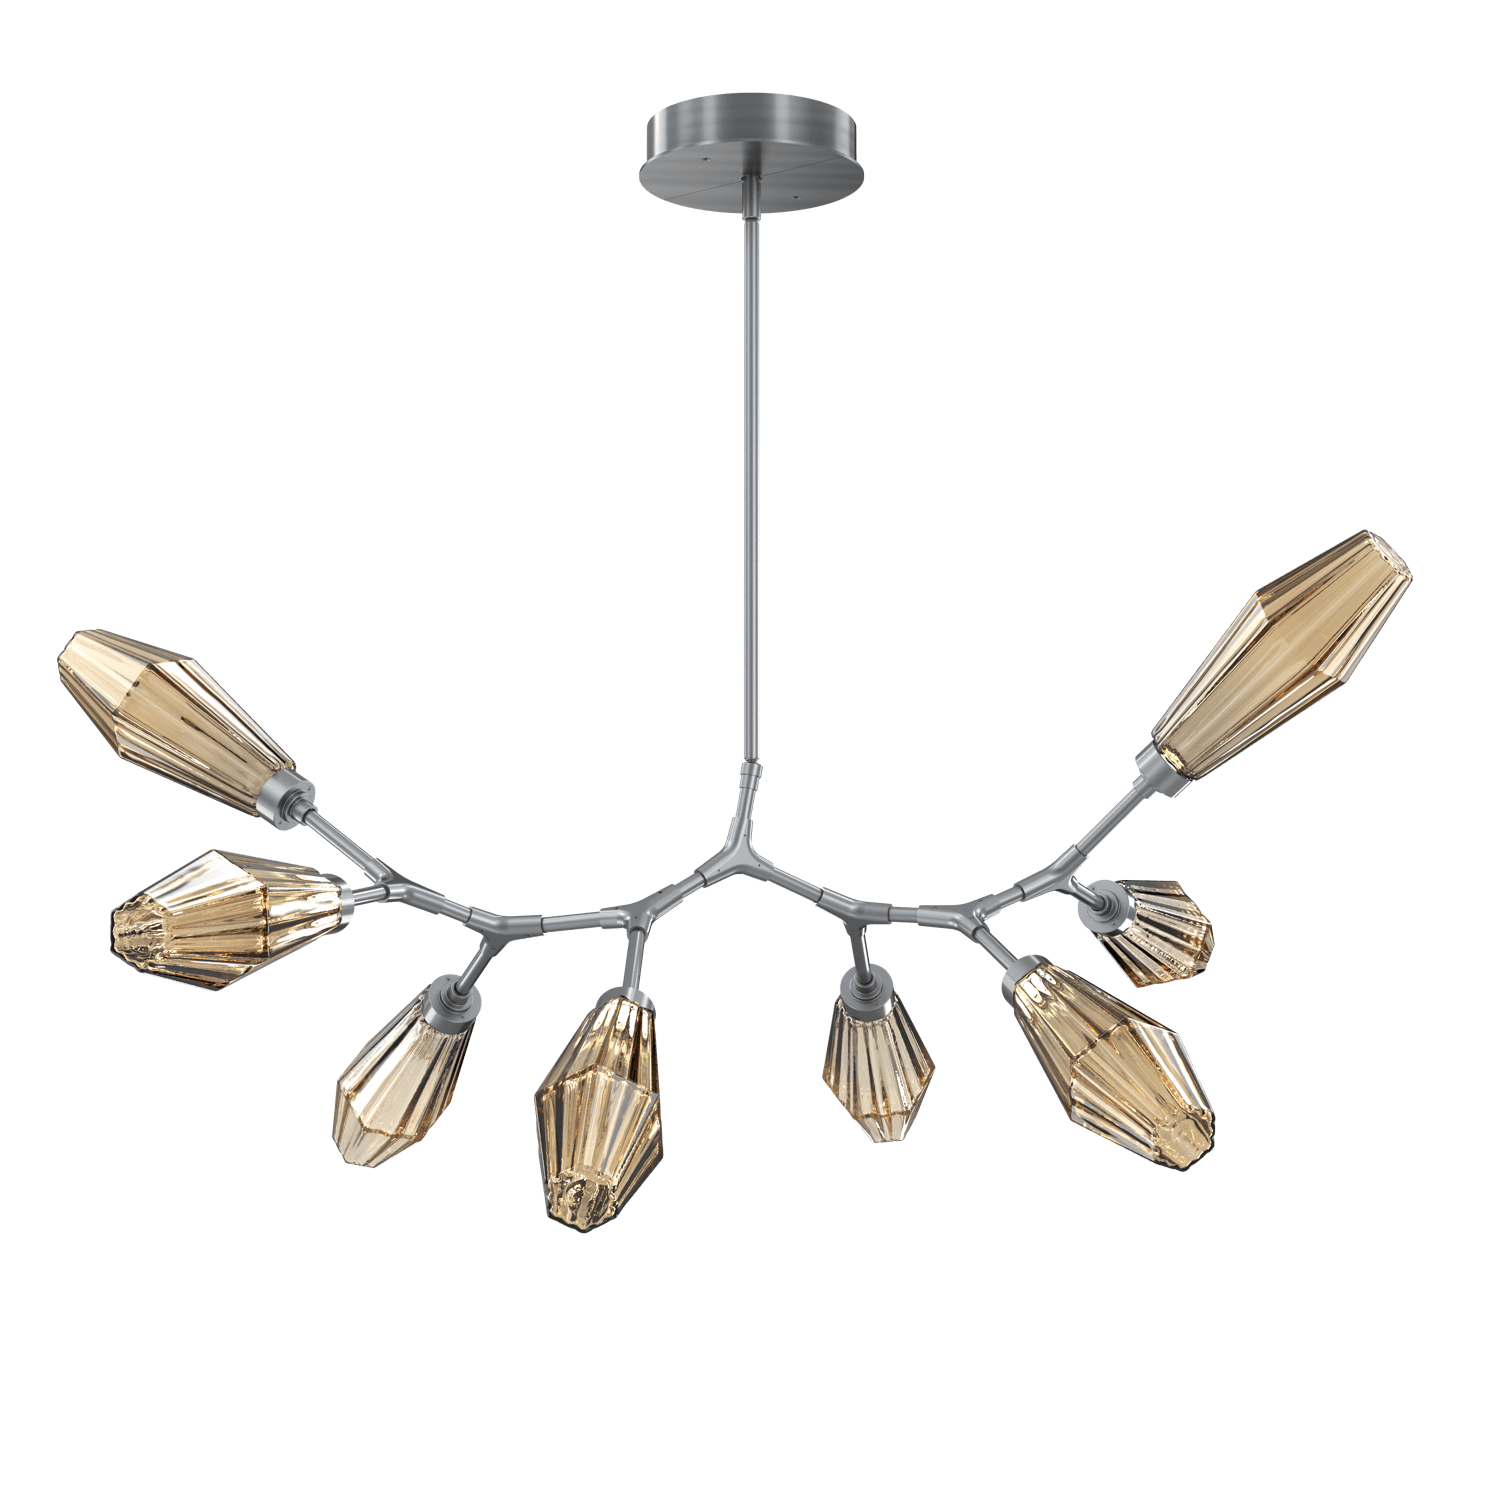 PLB0049-BB-GM-RB-Hammerton-Studio-Aalto-8-light-modern-branch-chandelier-with-gunmetal-finish-and-optic-ribbed-bronze-glass-shades-and-LED-lamping